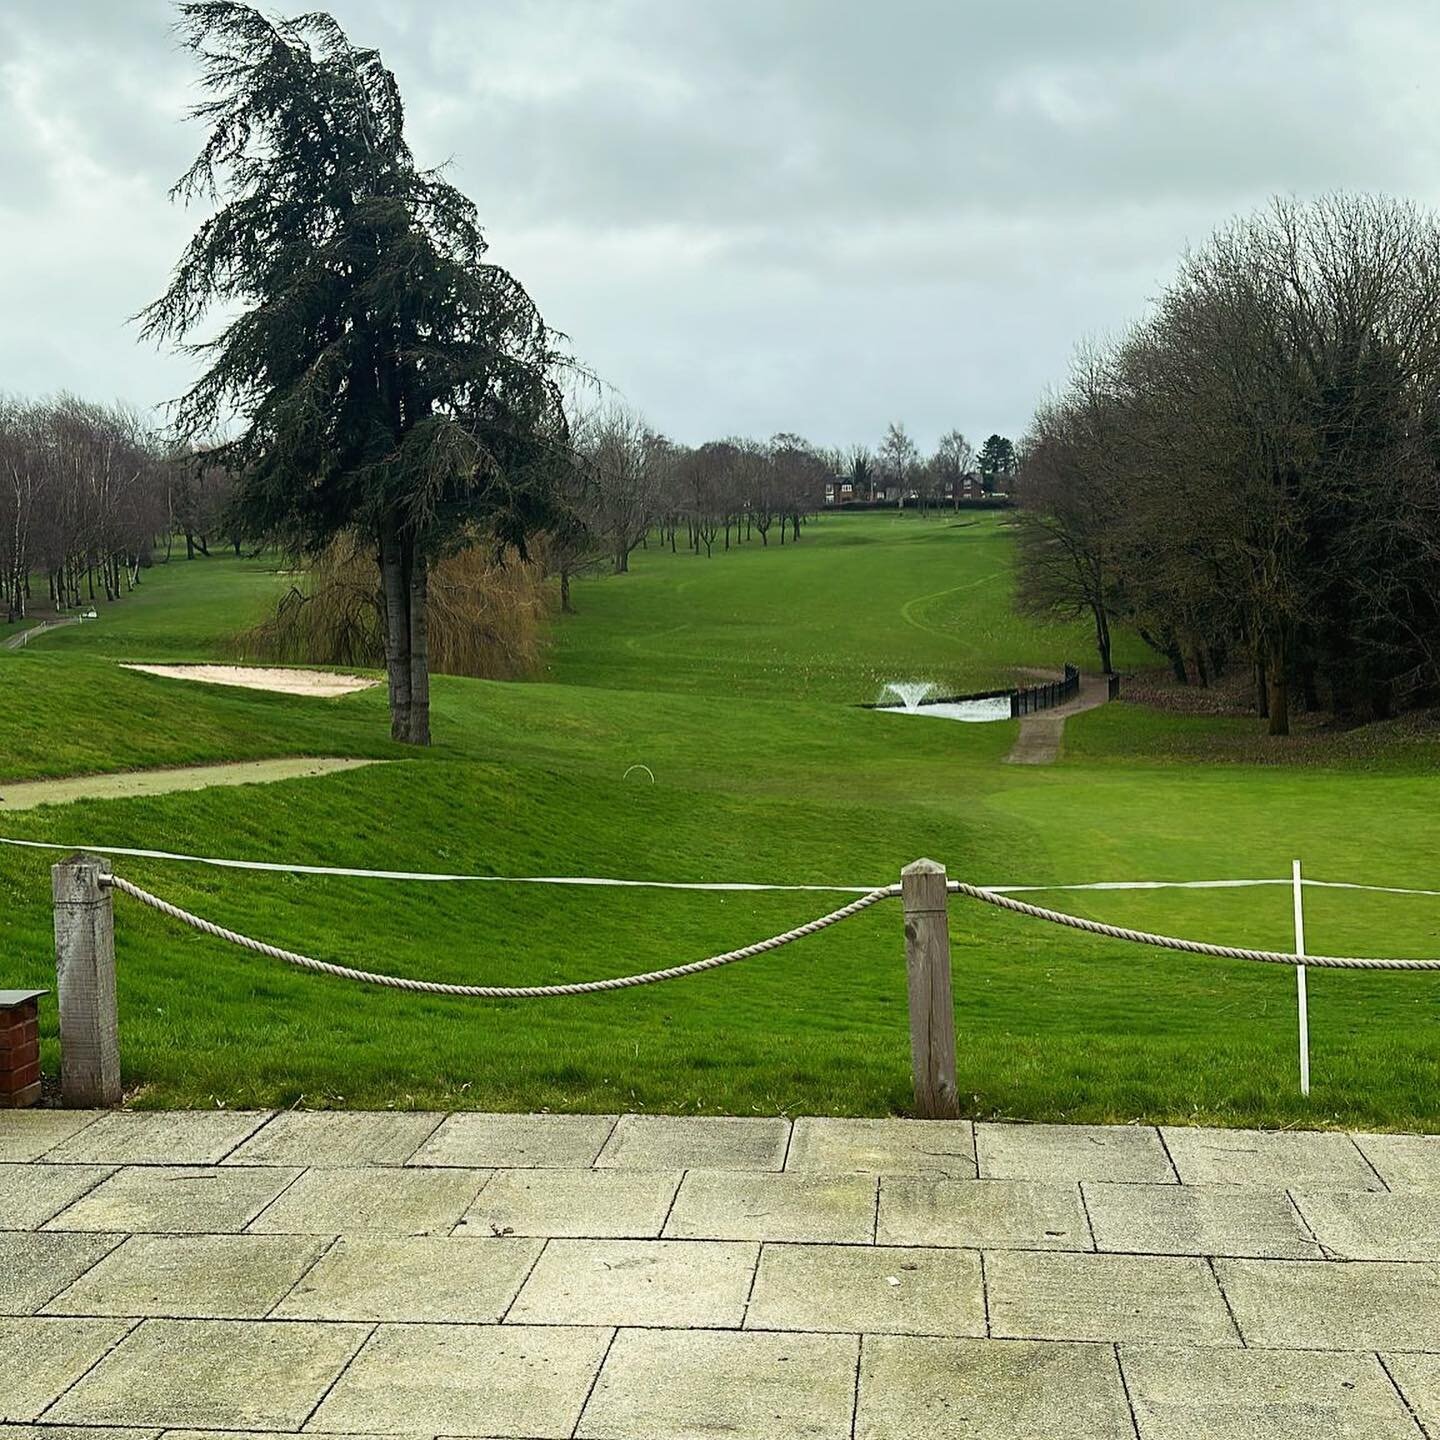 Today we started work on renovating the Clubhouse at Burton Golf Course ⛳️ Keep your eyes peeled for progress along the way at this stunning location📍 #renovation #burtongolfclub #clubhouse